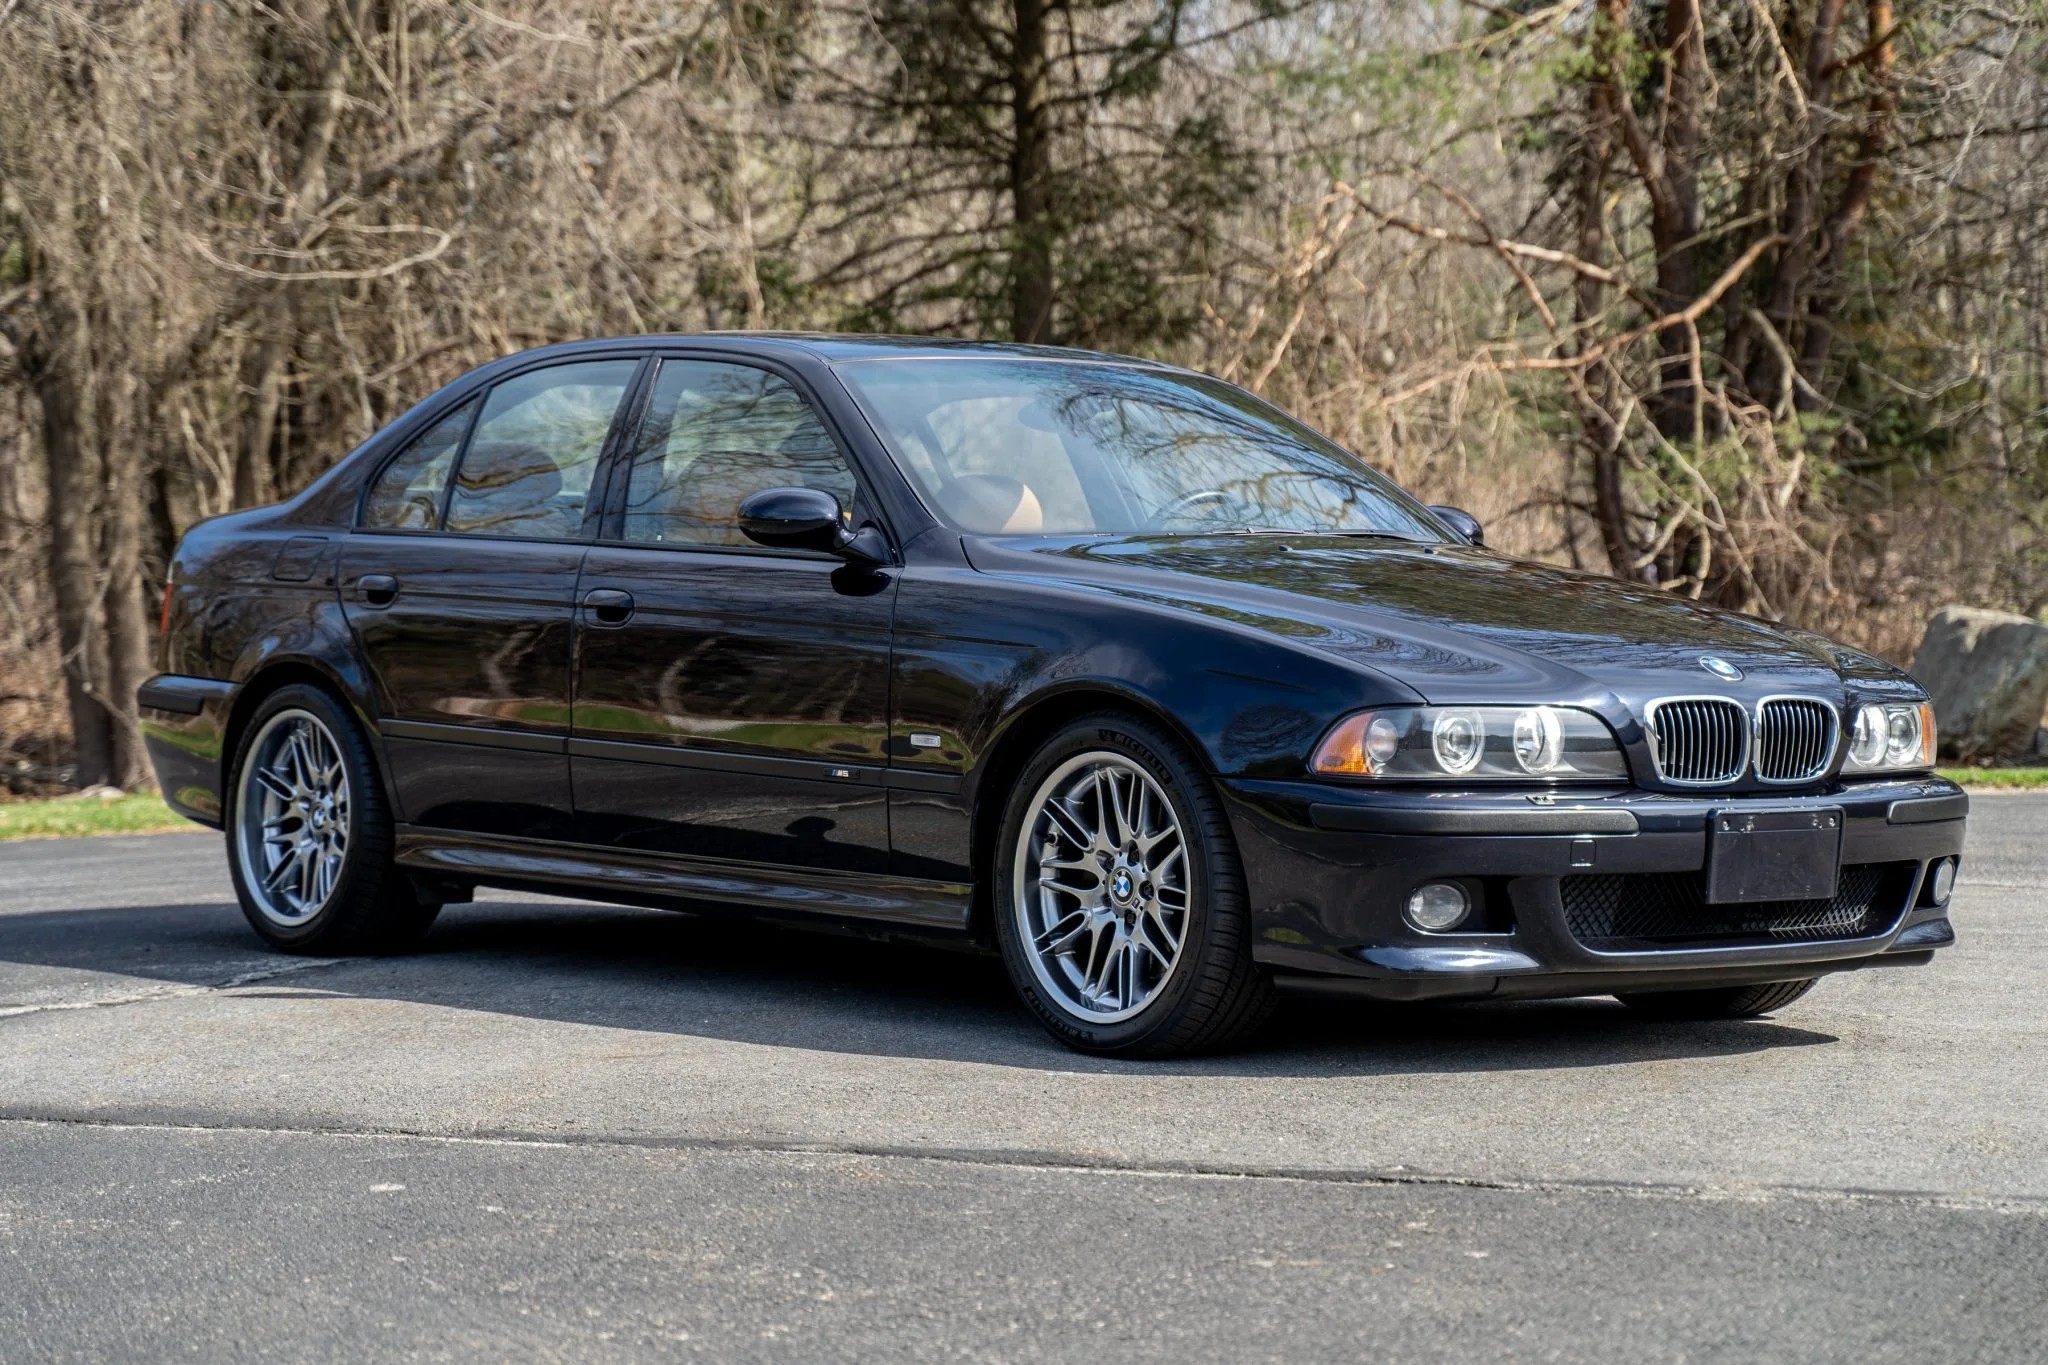 This 2001 Low-Mile BMW E39 M5 Is the Ultimate Go-Fast Sedan - autoevolution